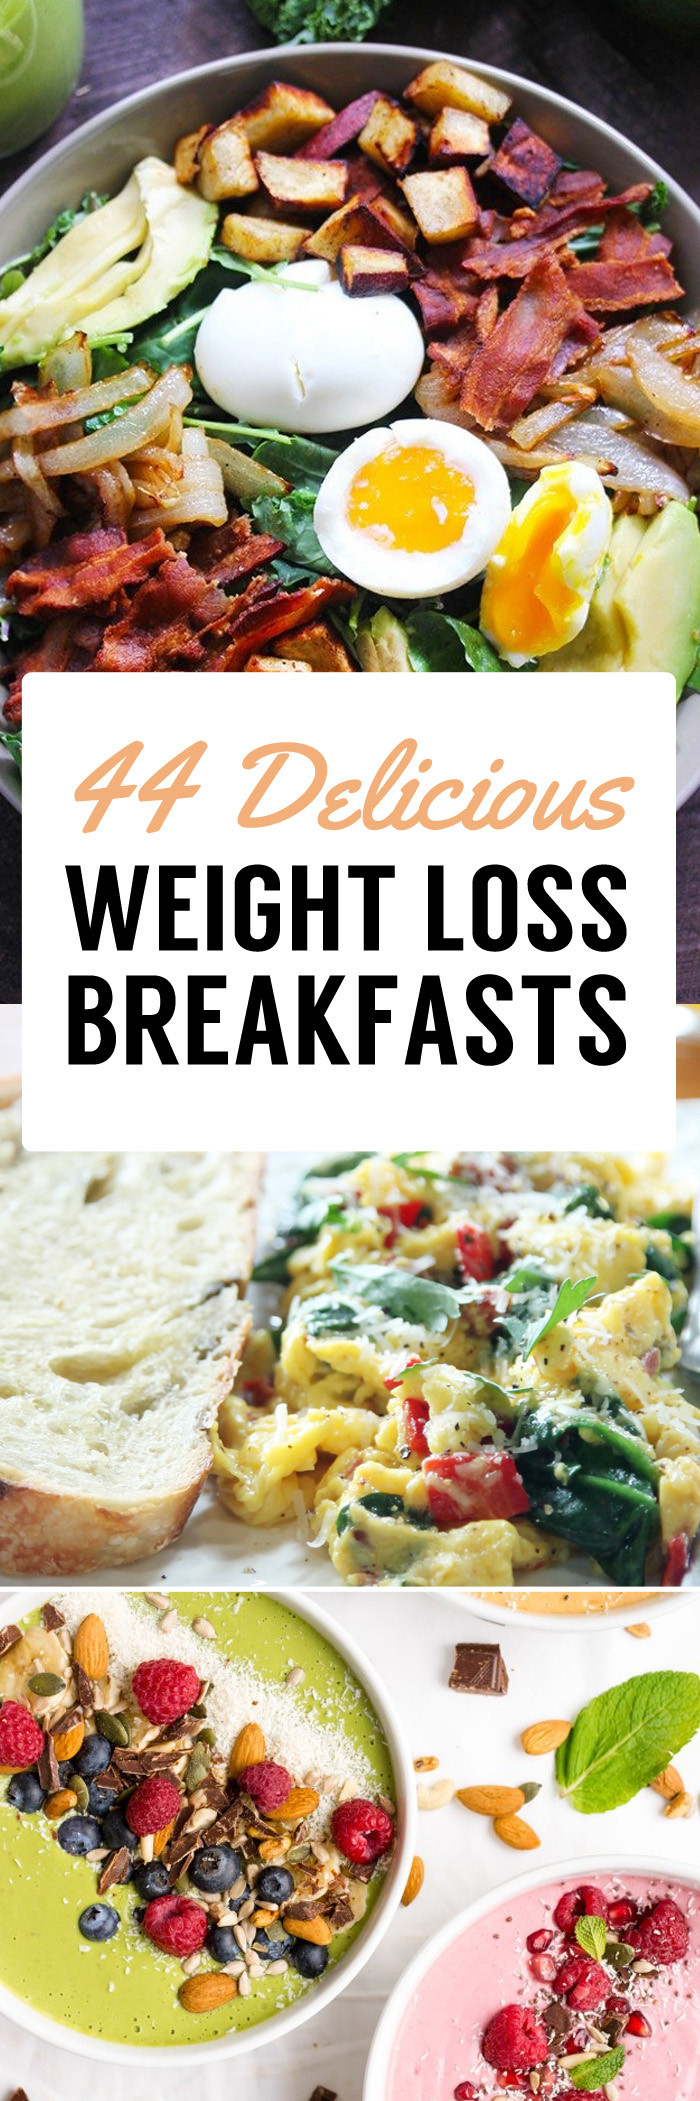 Healthy Breakfast Recipes For Weight Loss
 44 Weight Loss Breakfast Recipes To Jumpstart Your Fat